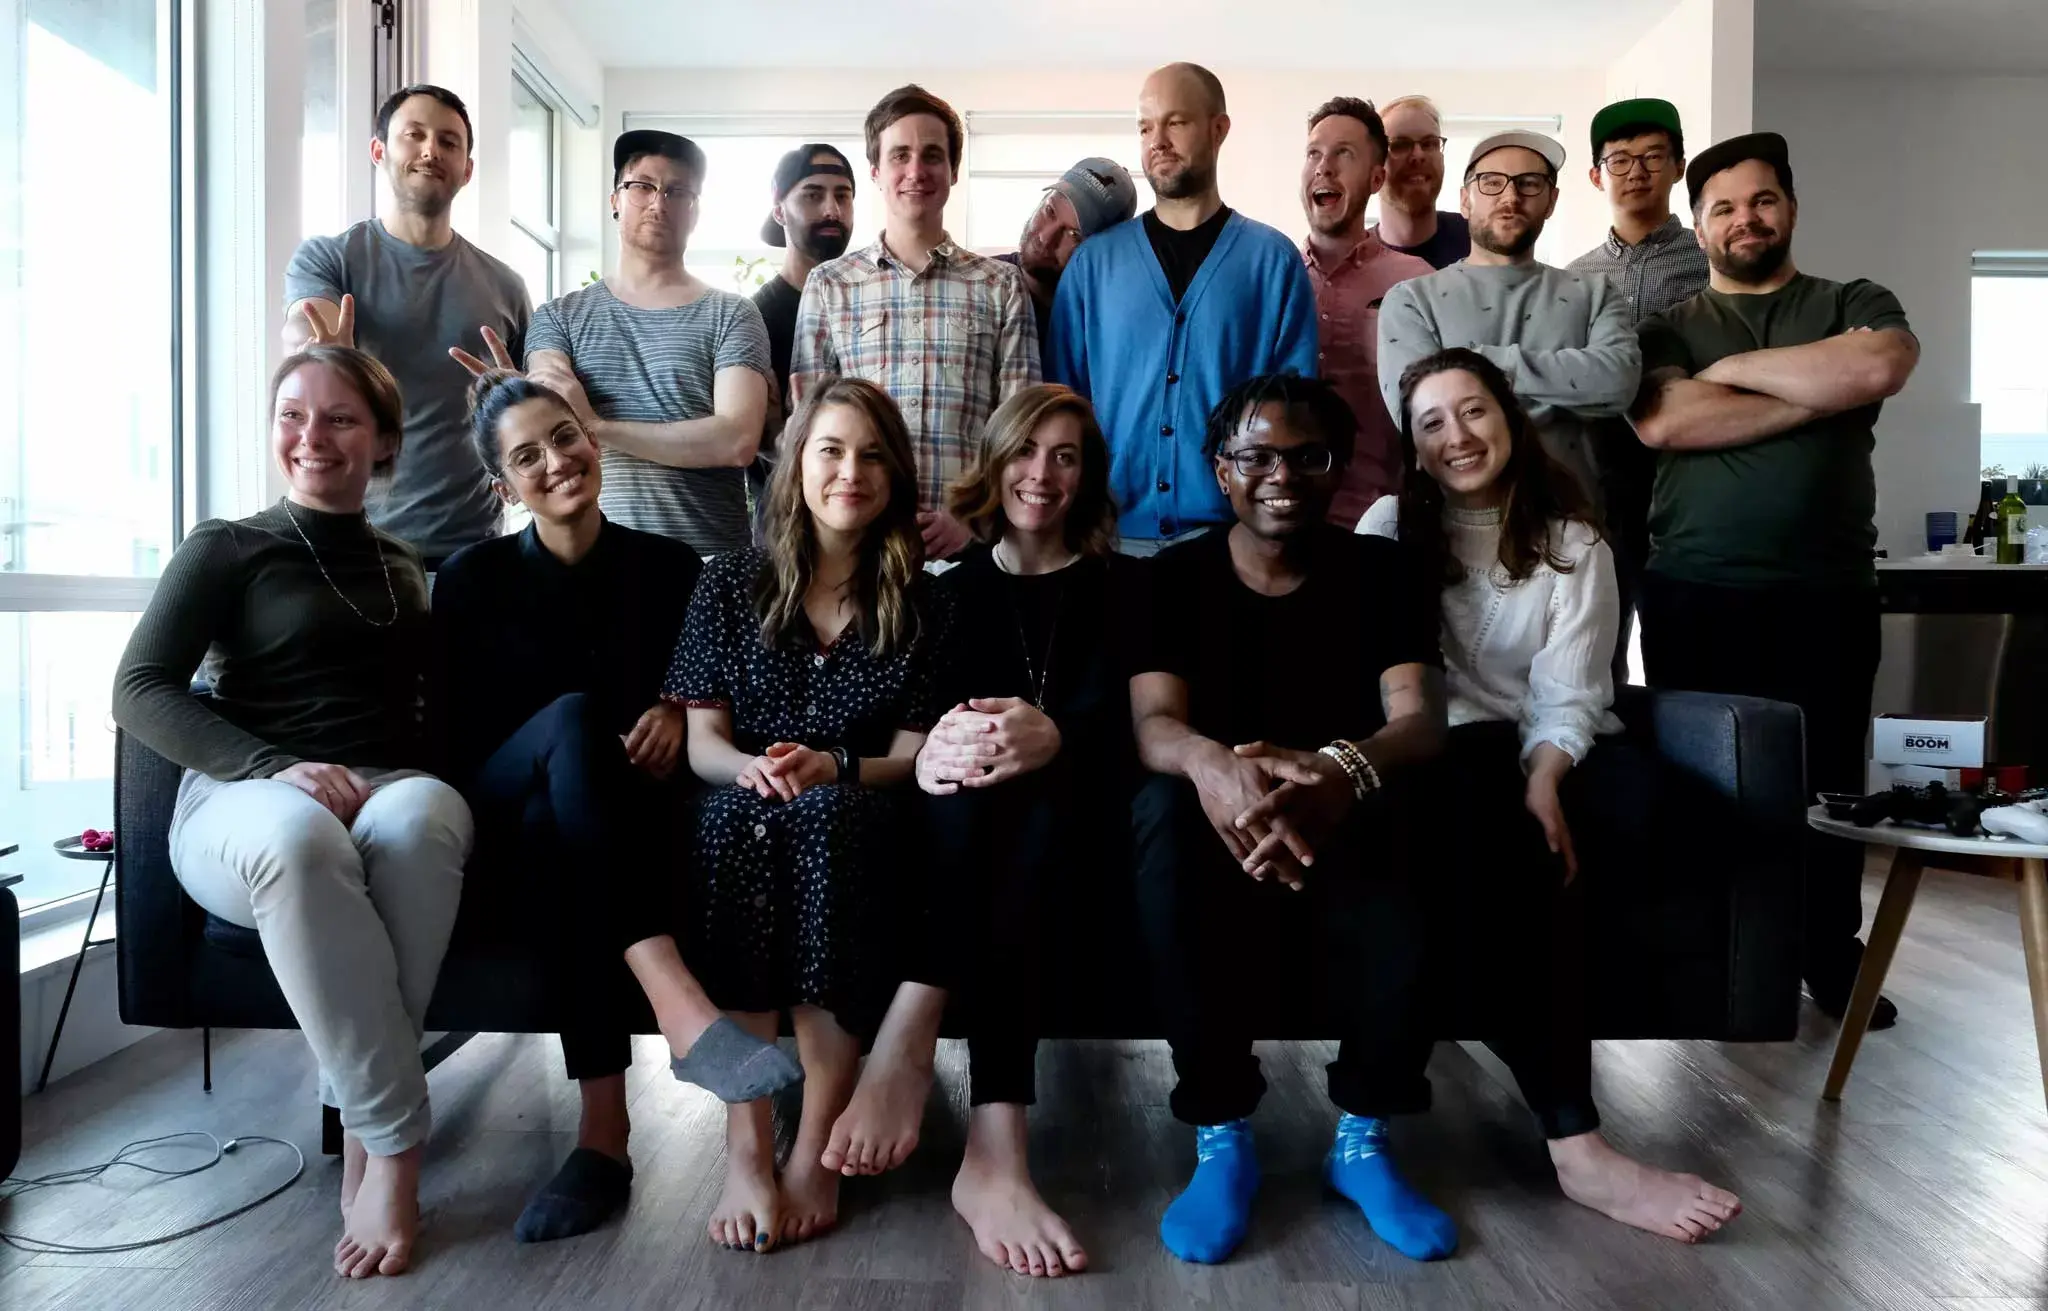 Bridging art and business: Meet the Comms Design team at Asana article banner image